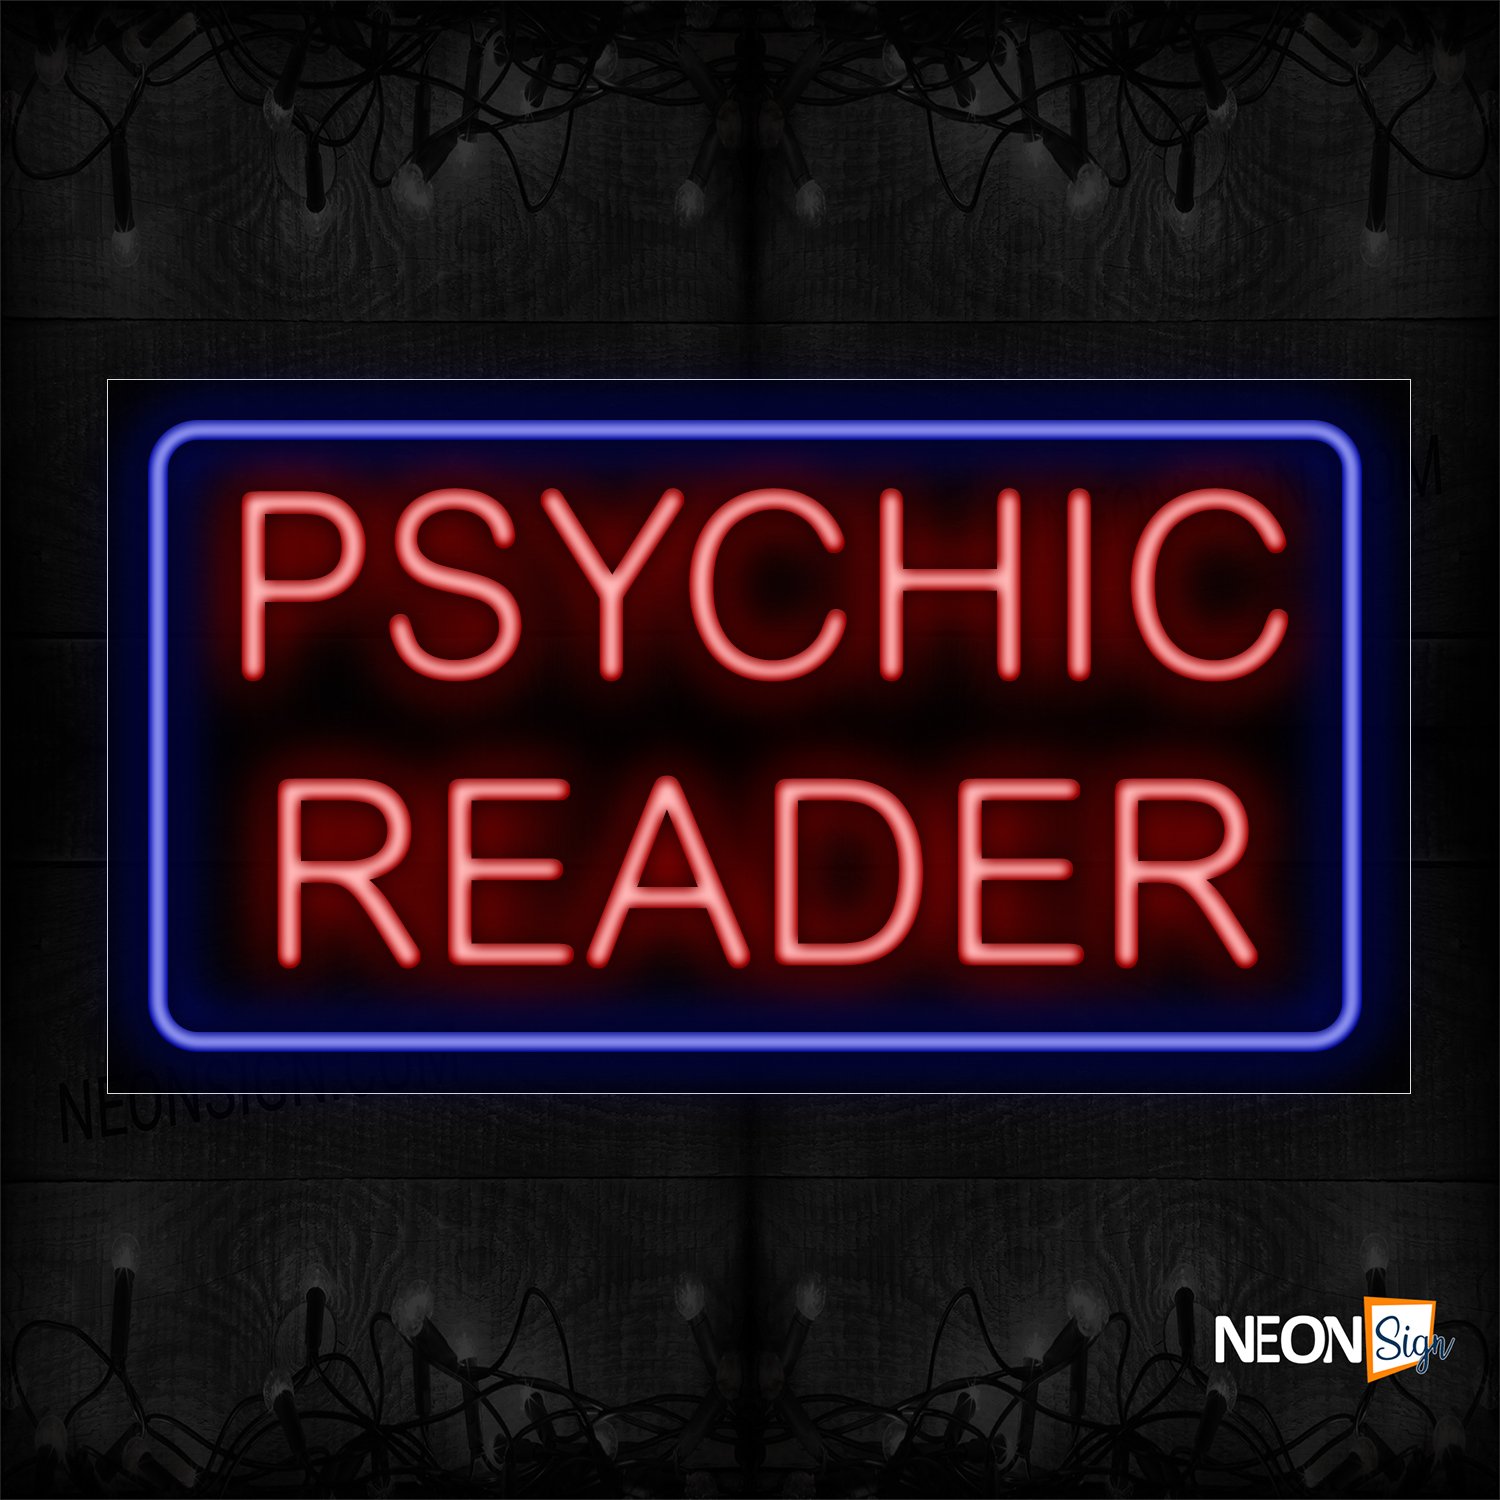 Image of 11298 Psychic Reader With Blue Box An Simple Text Neon Sign_20x37 Black Backing11298 Psychic Reader With Blue Box An Simple Text Neon Sign_20x37 Black Backing